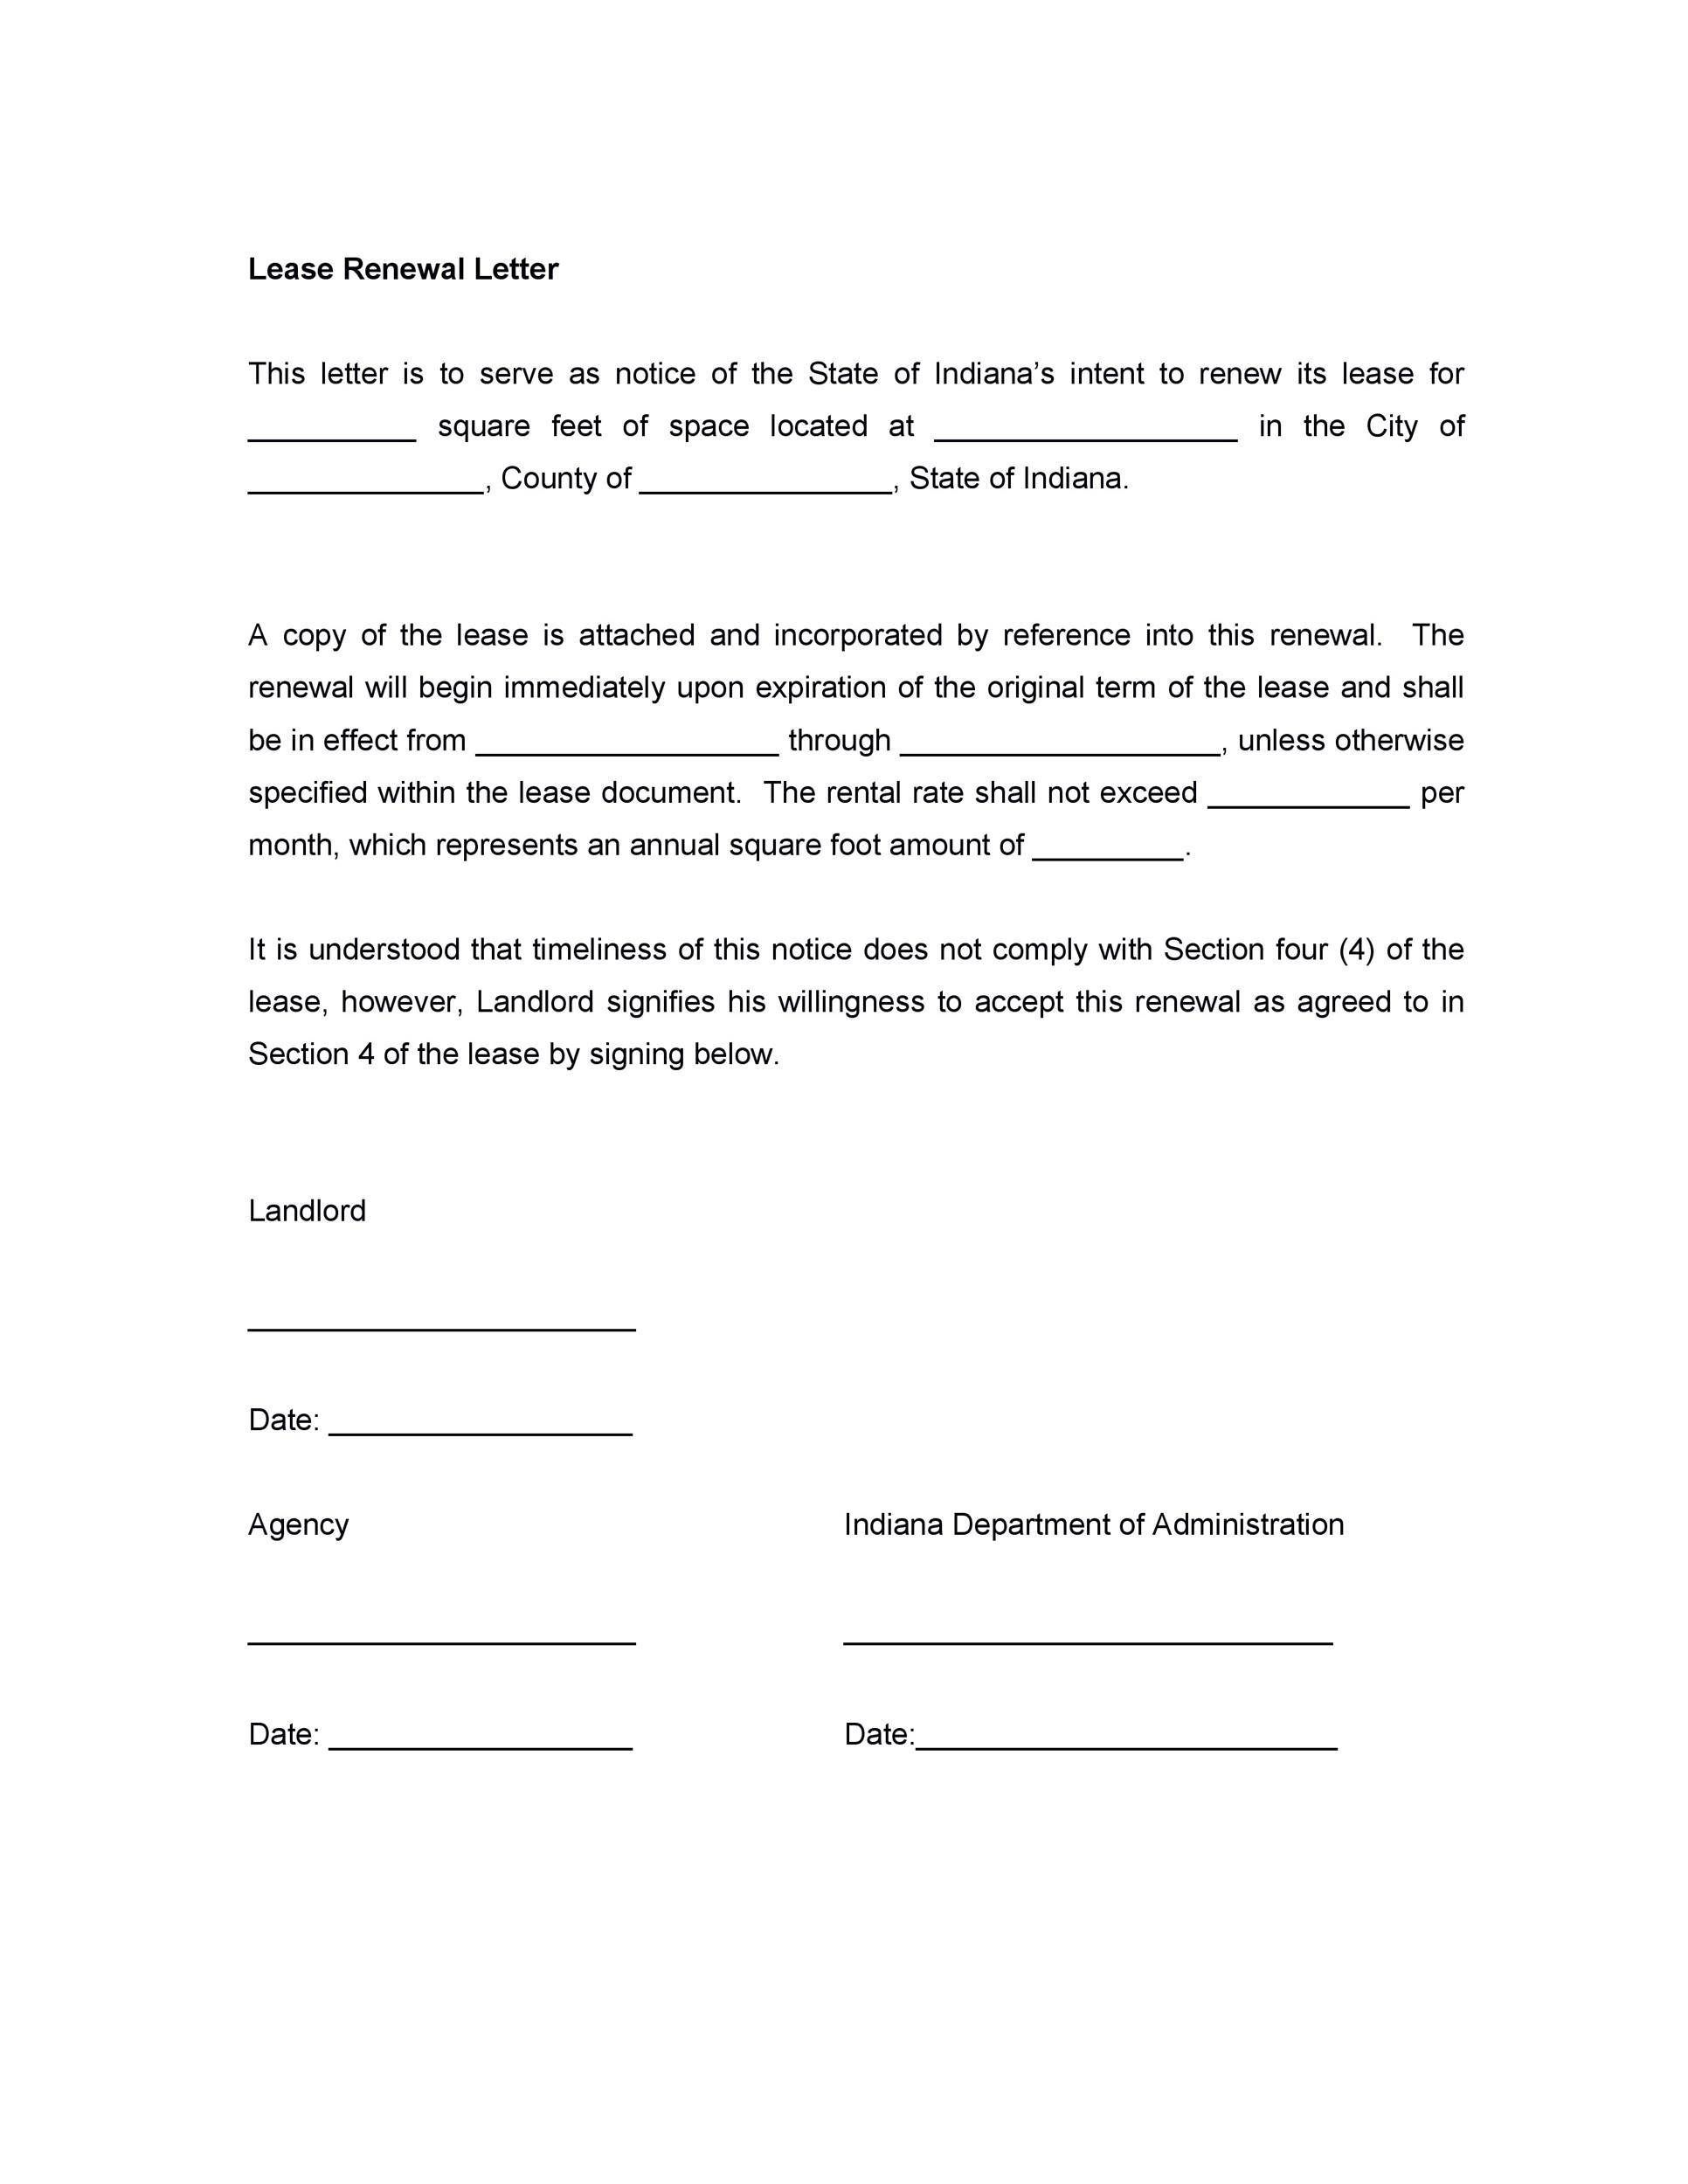 sample-letter-landlord-to-tenant-not-renewing-lease-letter-template